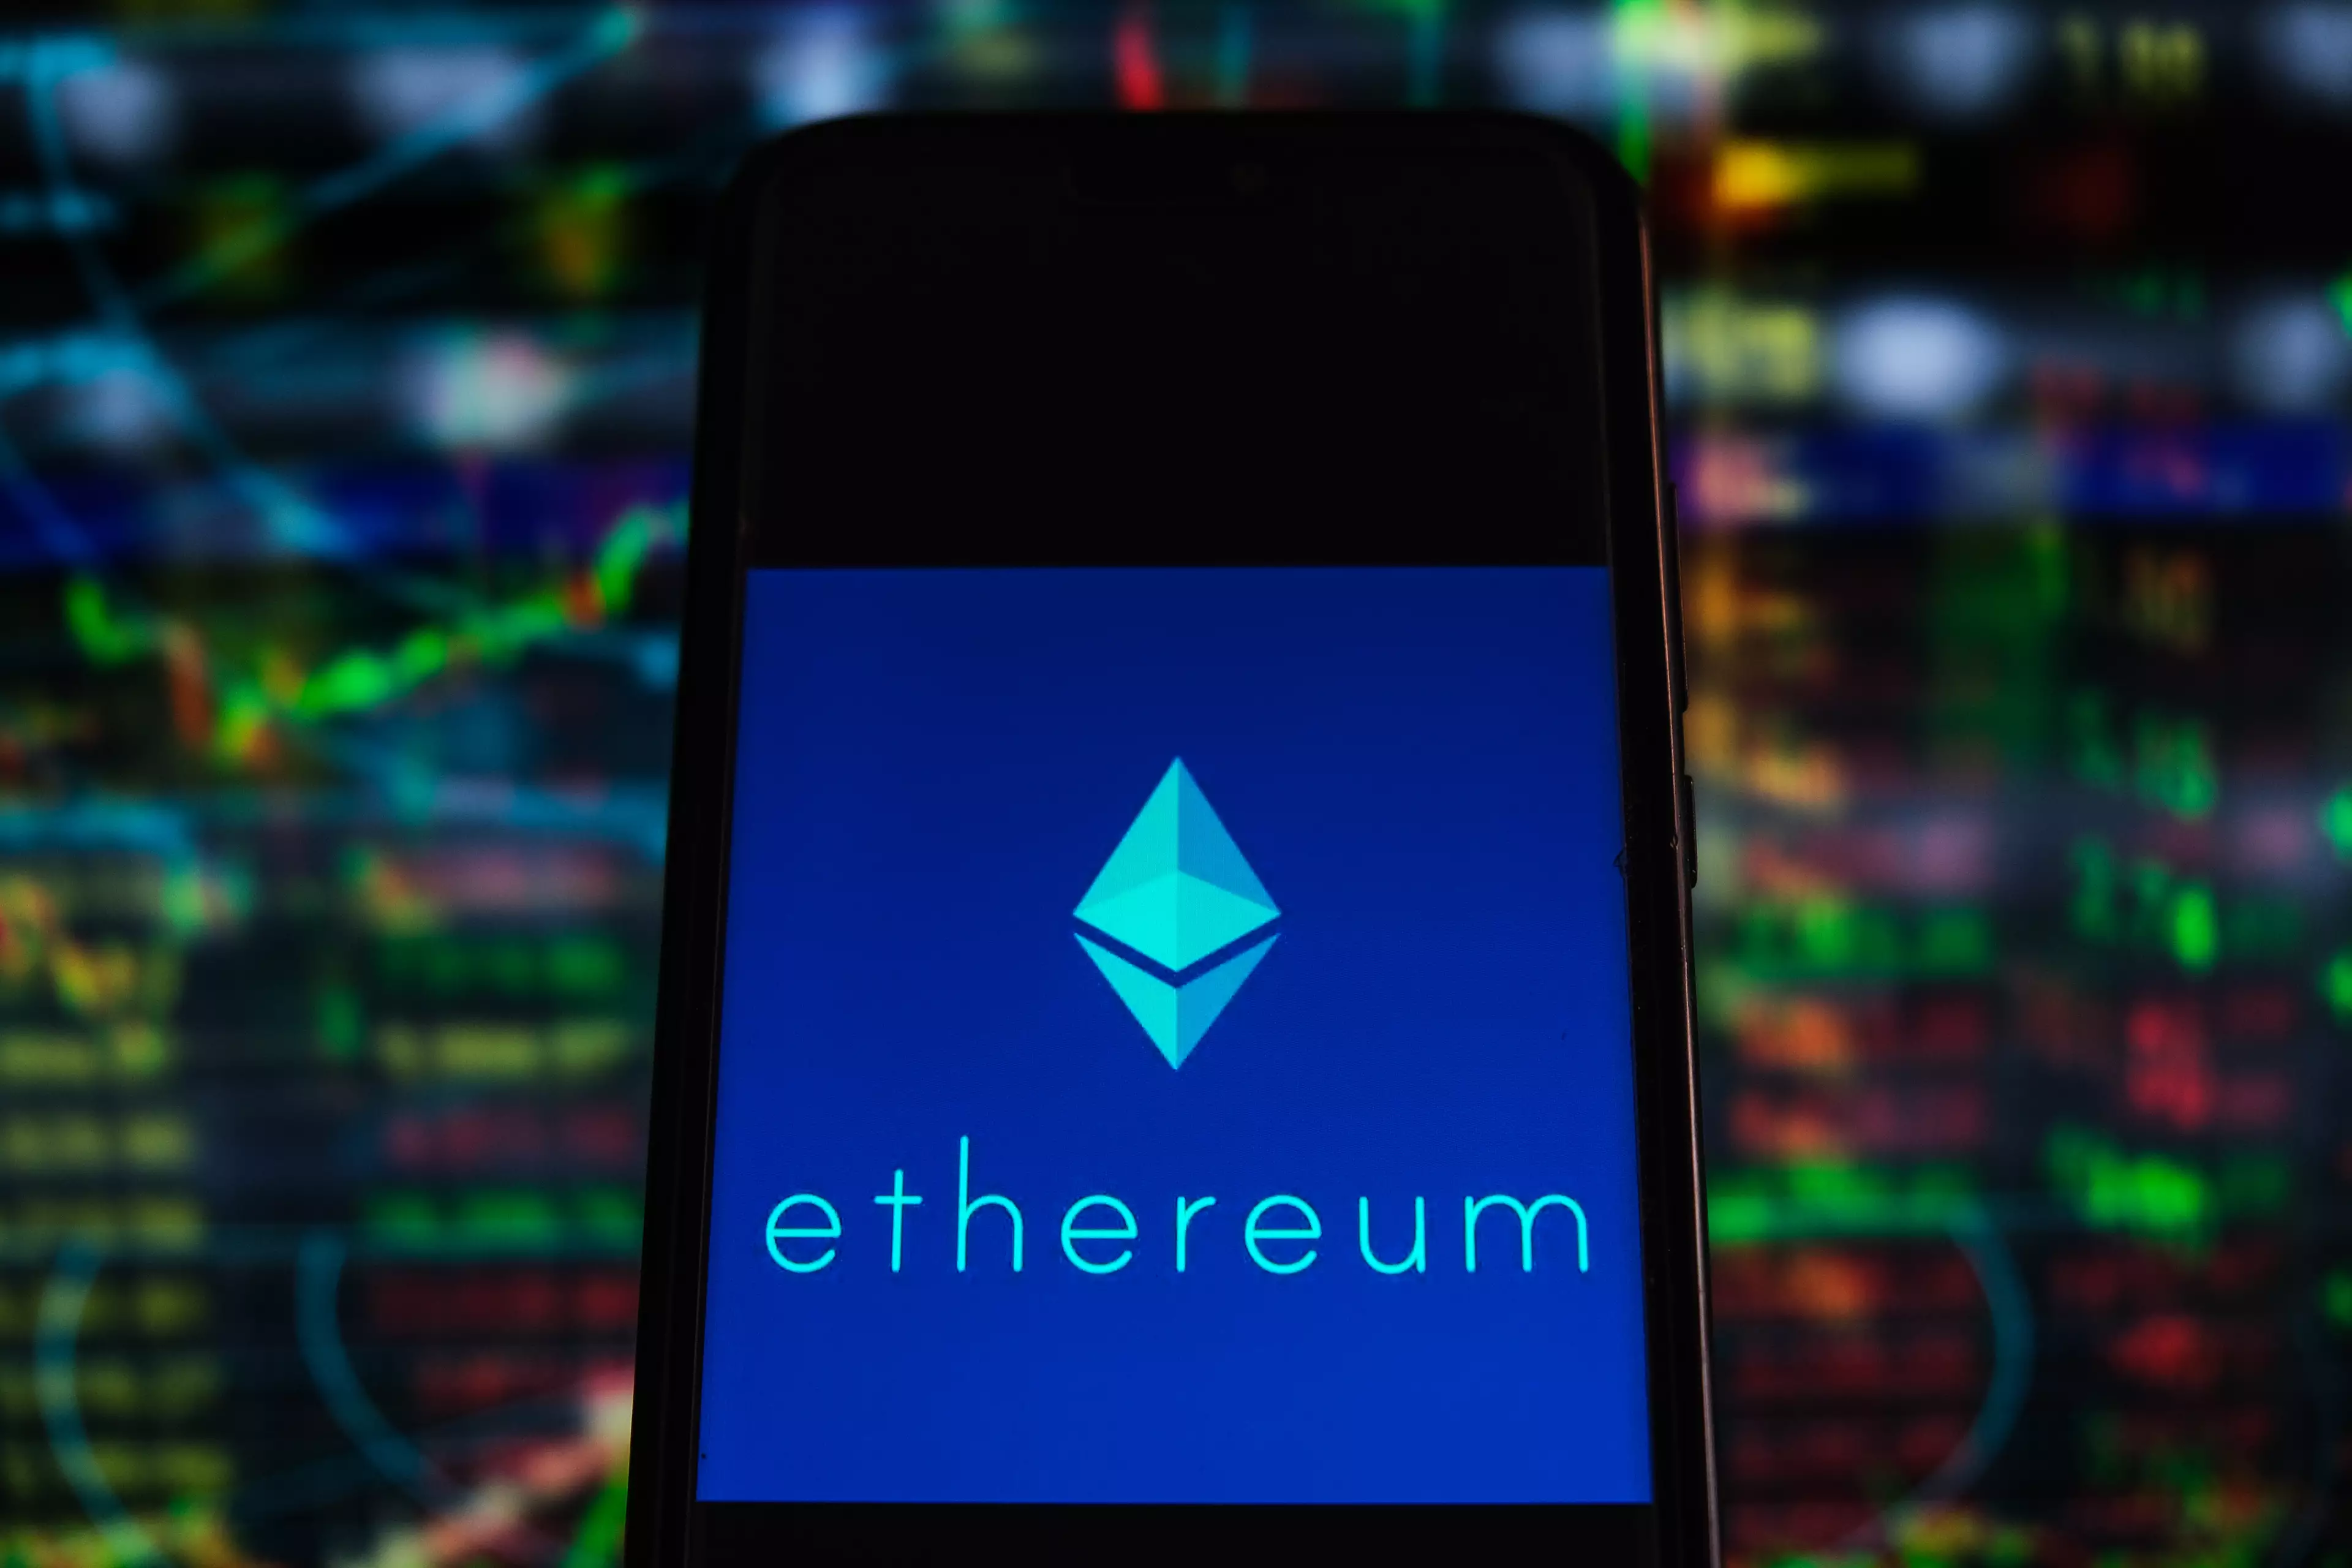 The price of Ethereum could rise higher still.